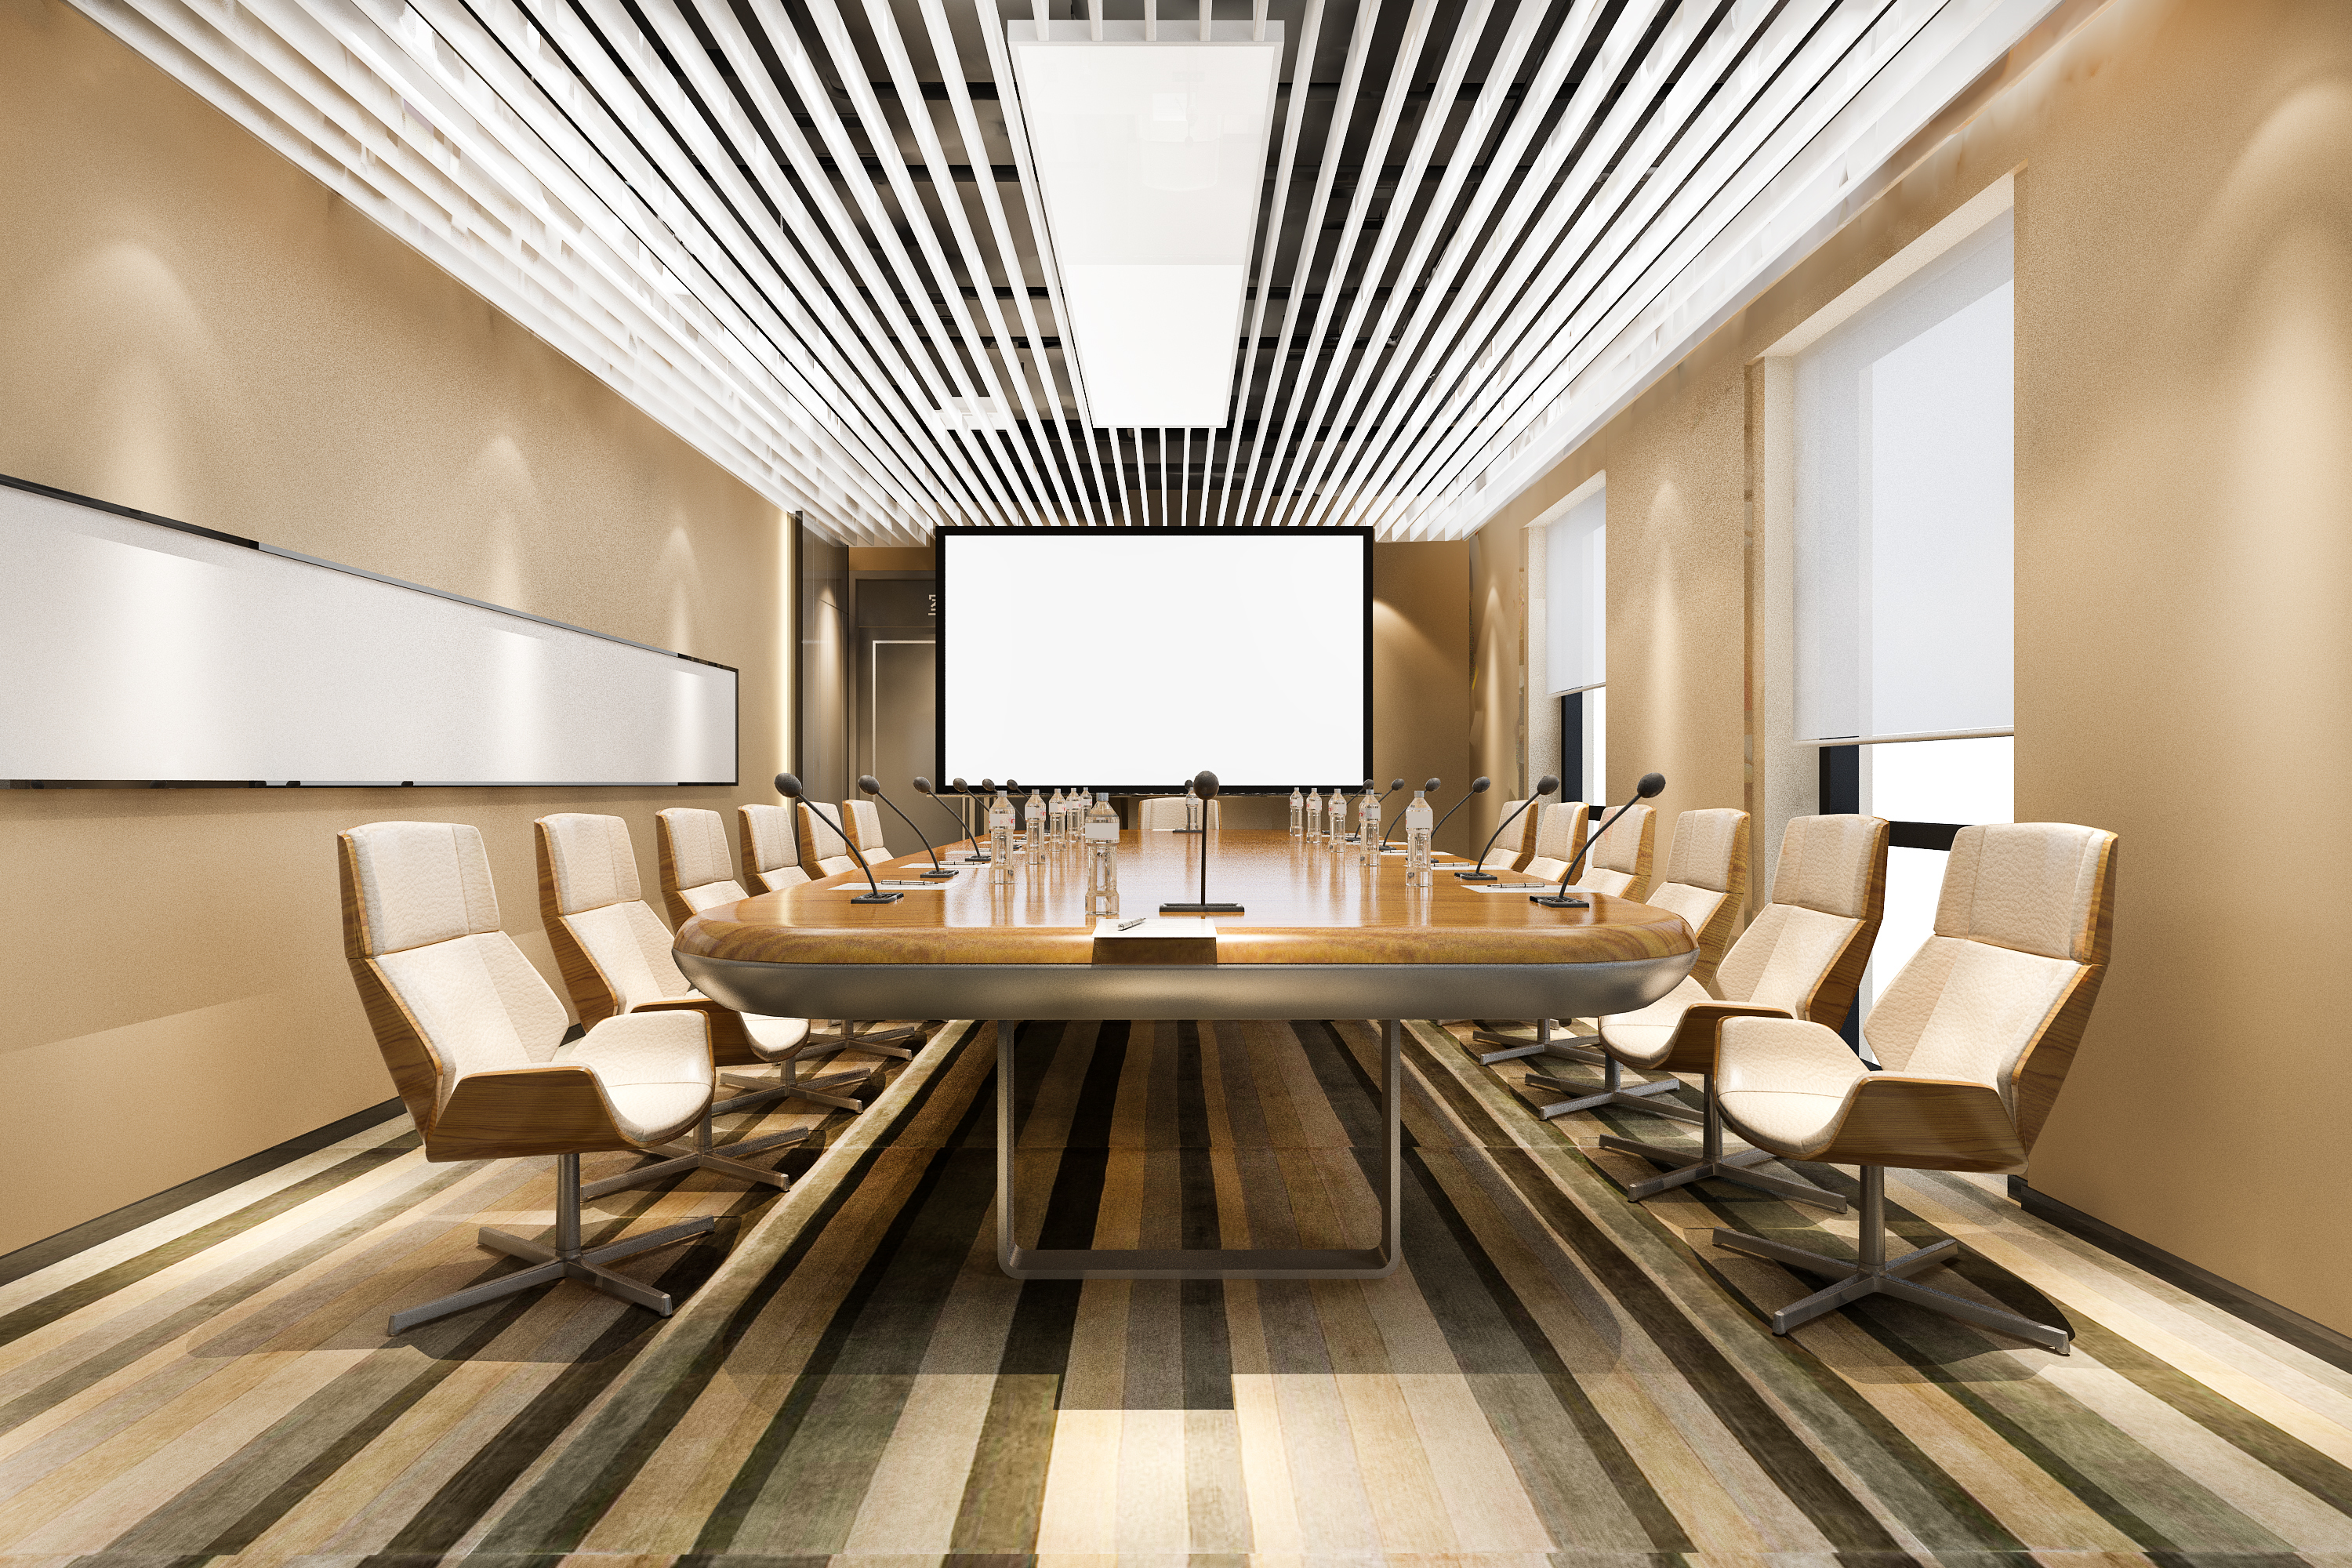 Conference room 3d rendering business meeting room in office build 2023 11 27 04 49 16 utc
